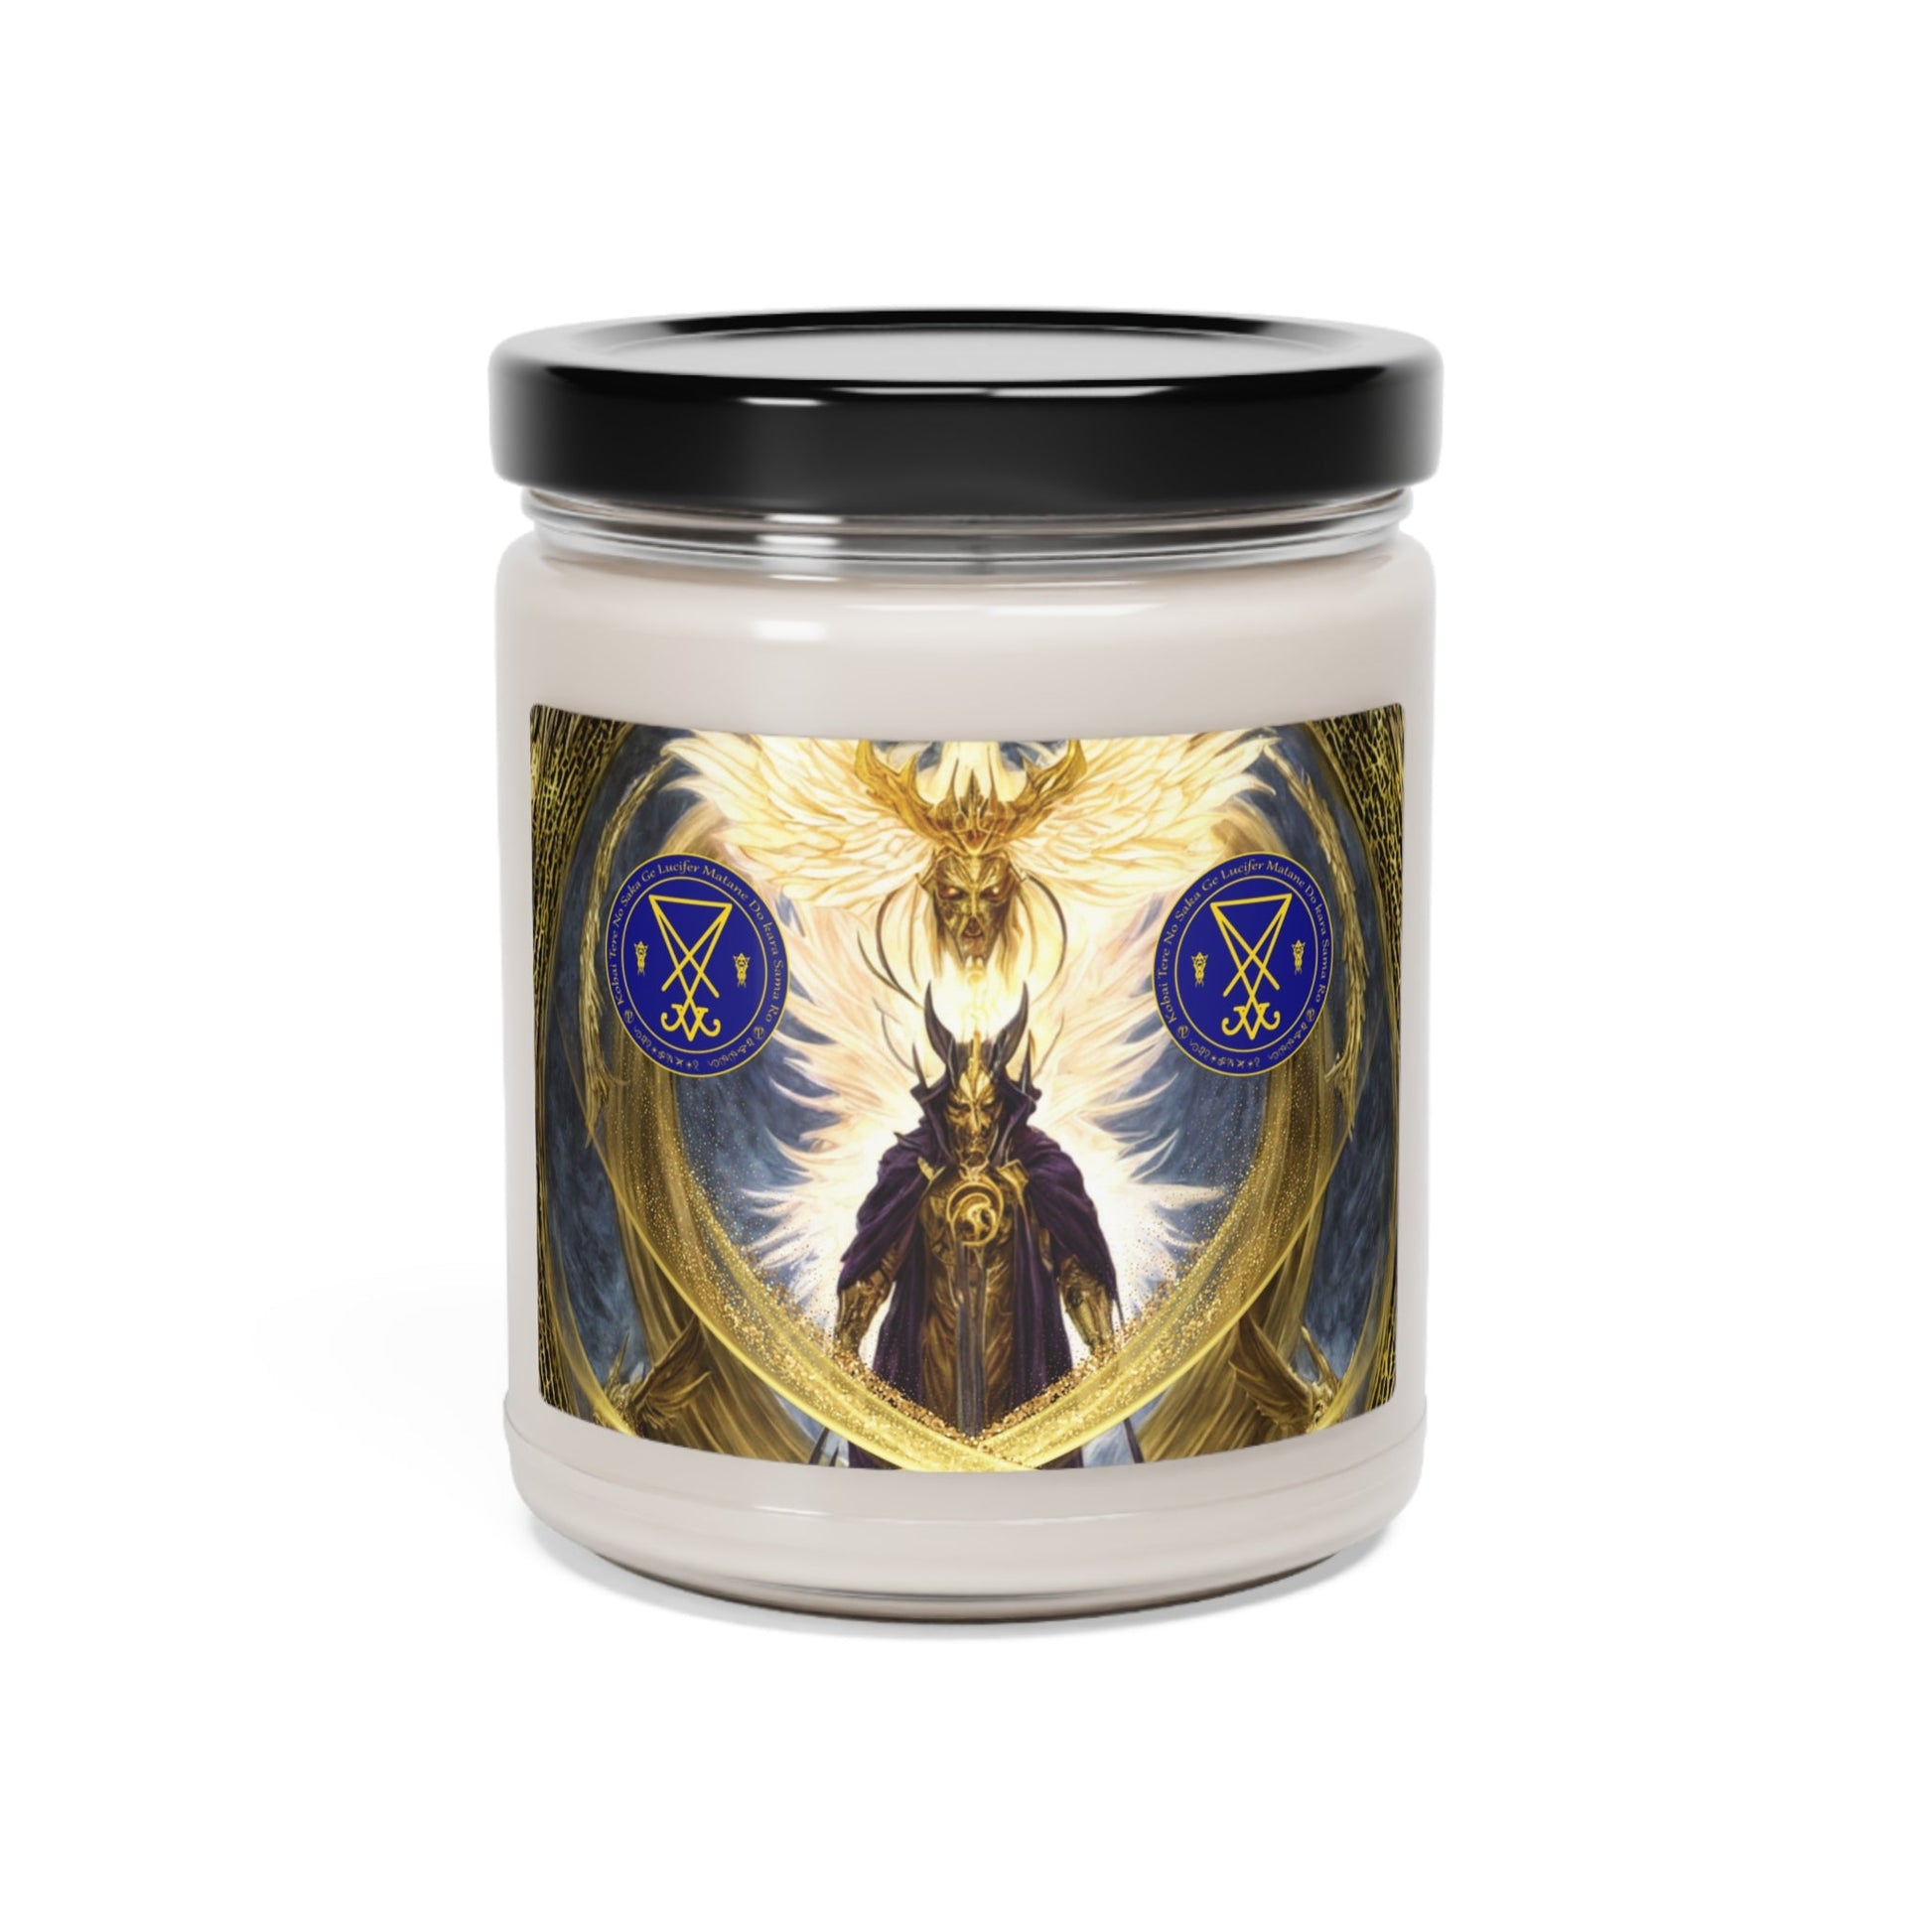 Demon-Lucifer-Scented-Soy-Candle-for-Altar-offerings-rituals-initiations-or-praying-and-meditation-6